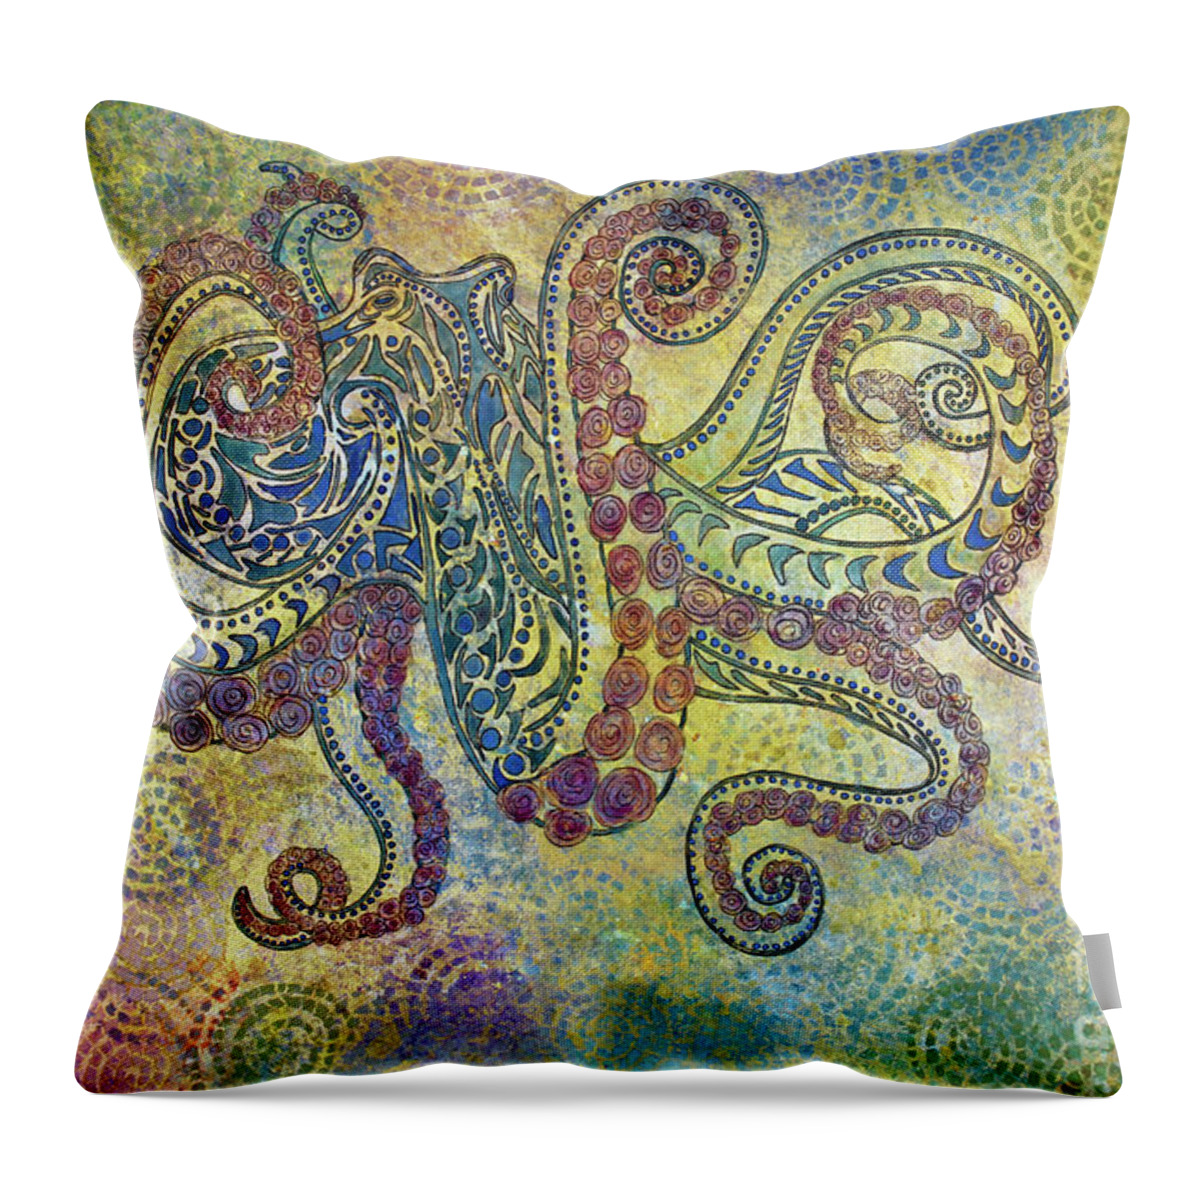 Octopus Throw Pillow featuring the painting Glass Octopus by Janet Immordino